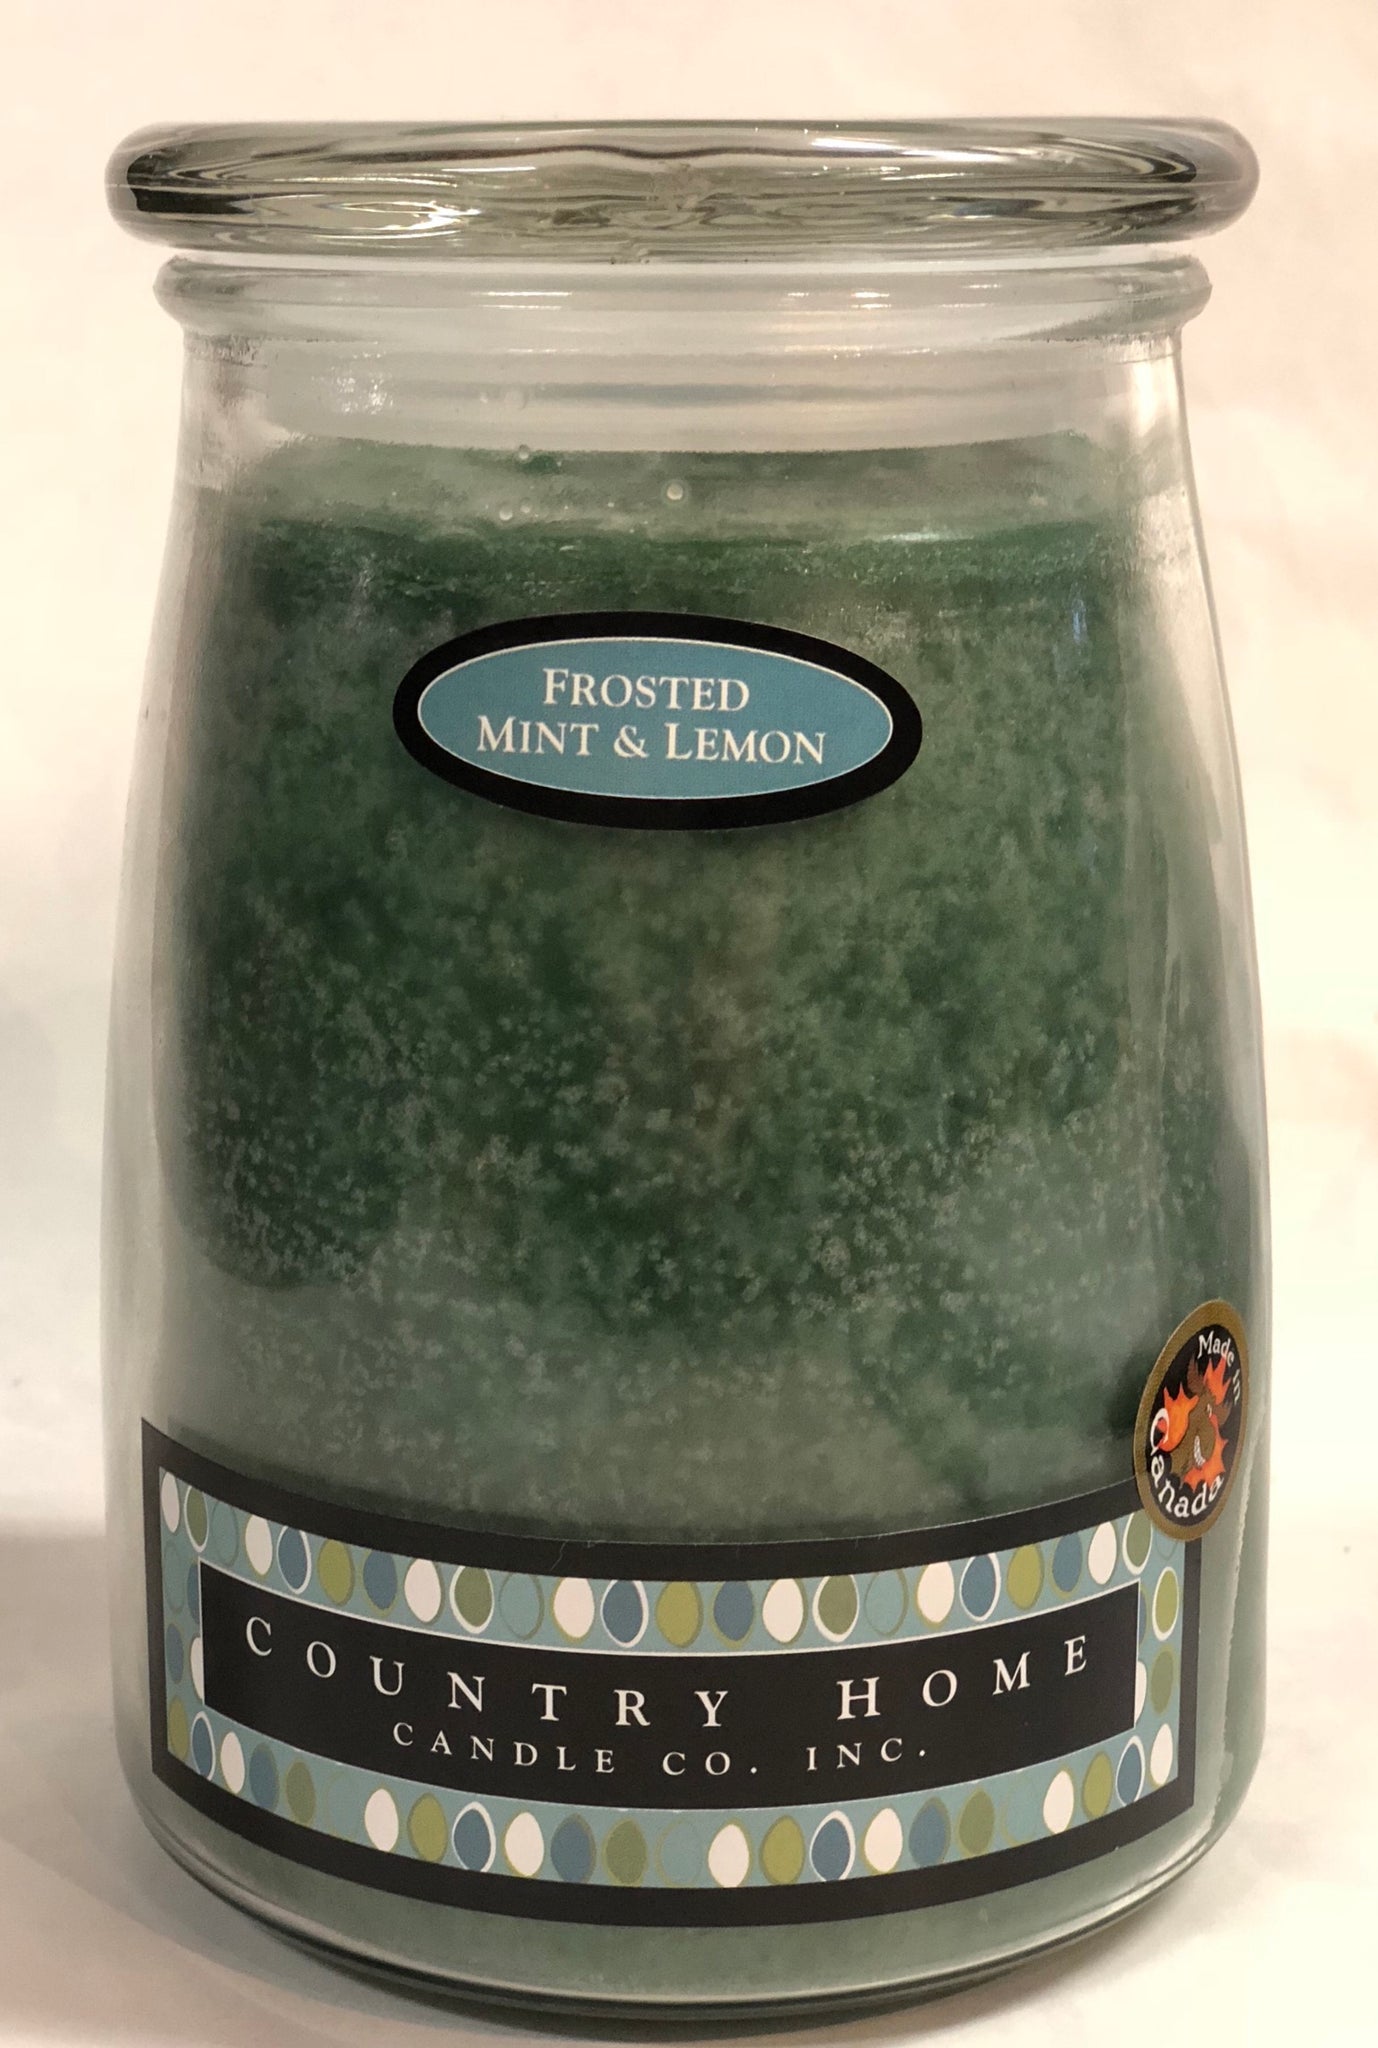 Country Home Jar Candle - Frosted Mint & Lemon